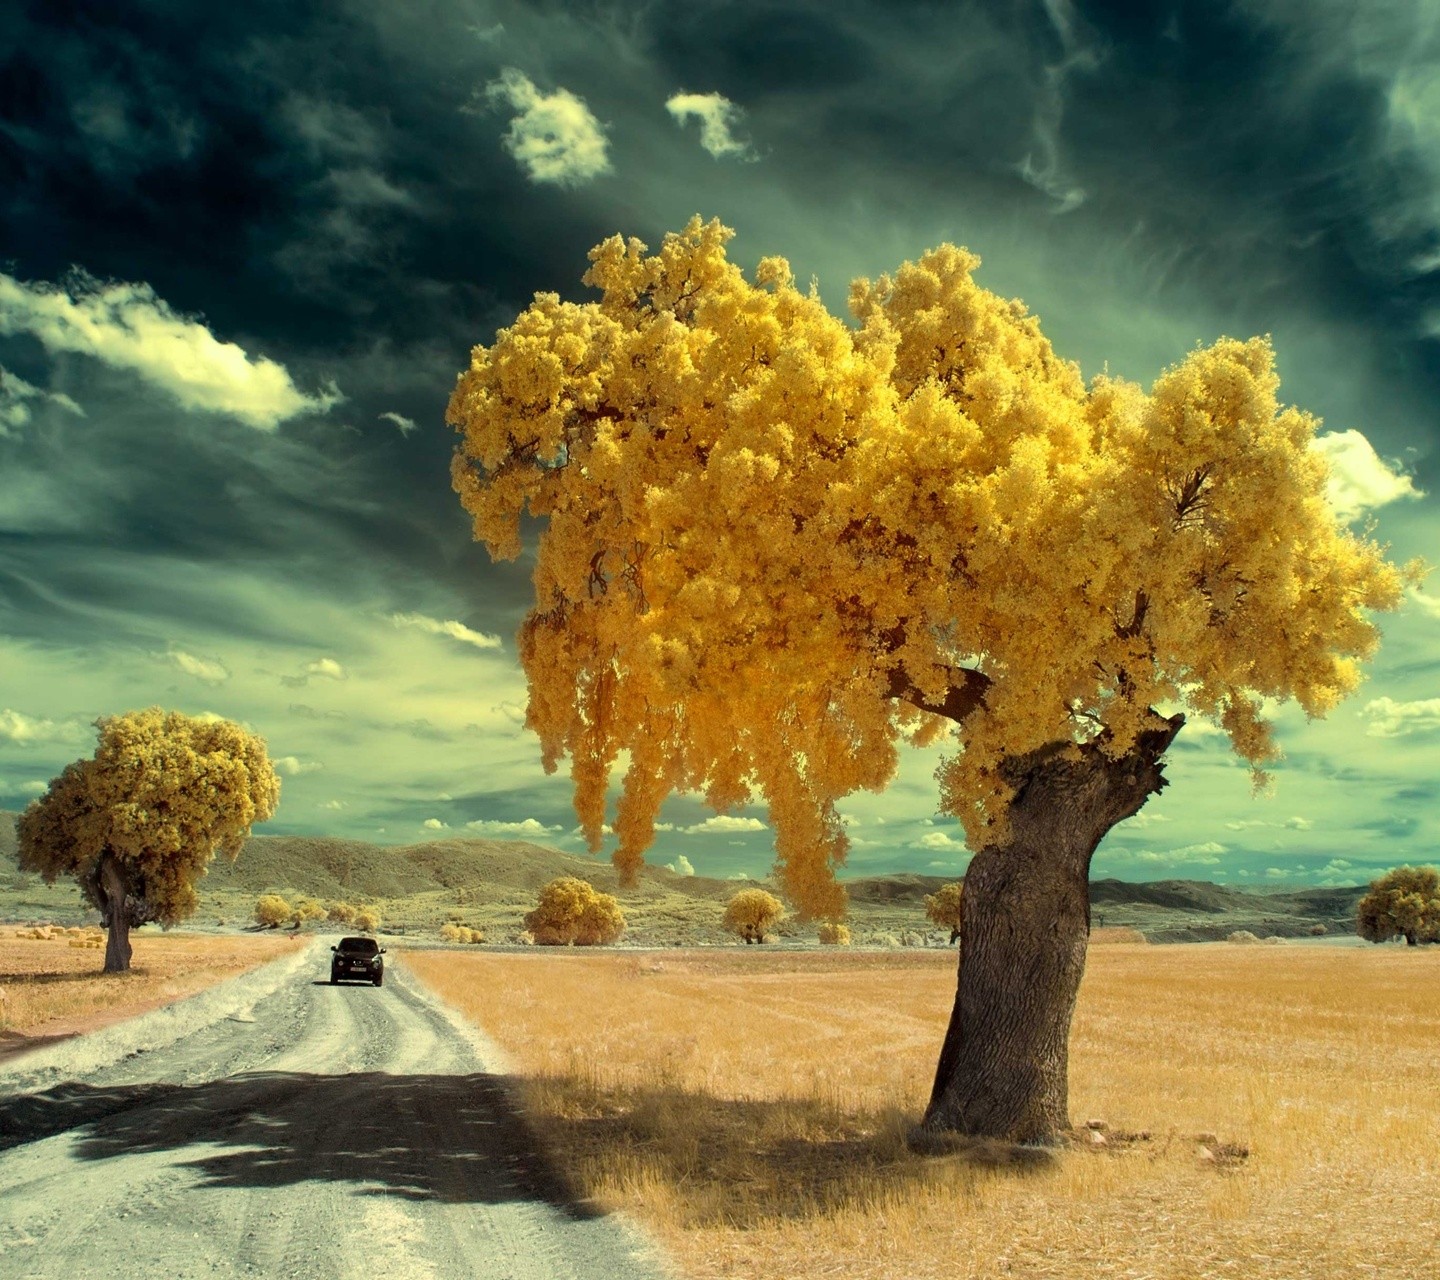 General 1440x1280 trees road clouds vehicle sky landscape outdoors